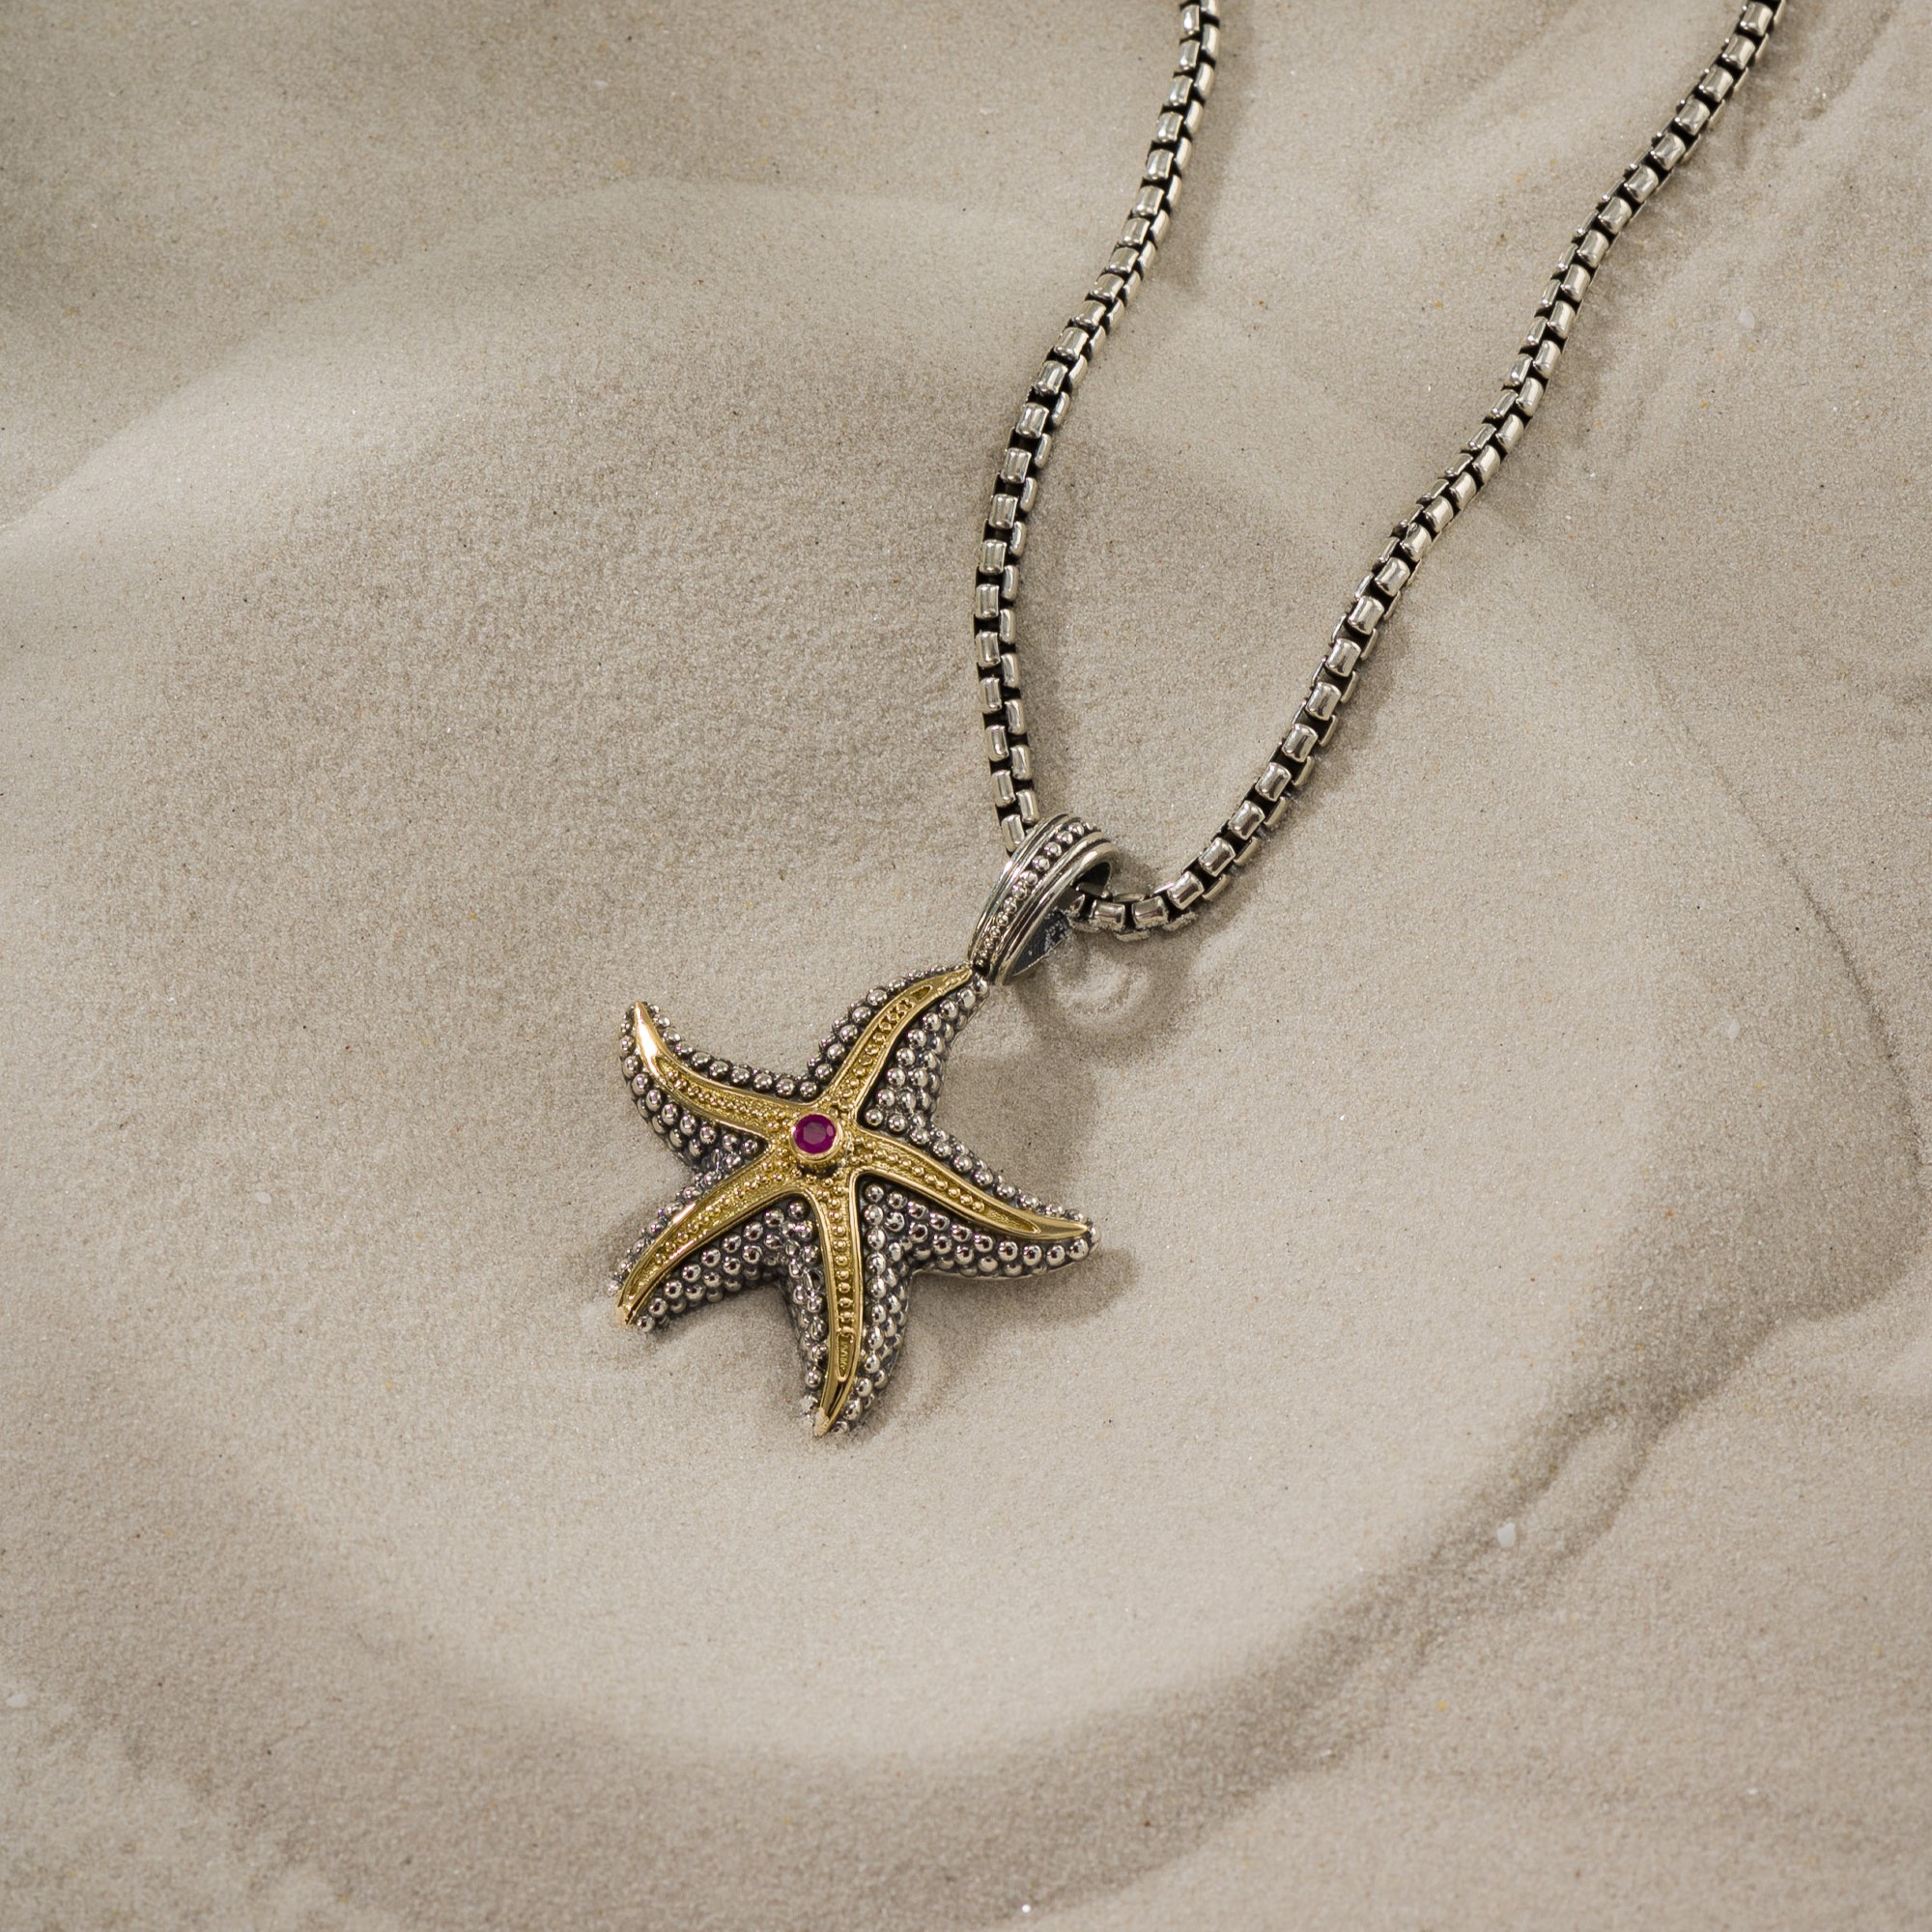 Starfish Pendant in 18K Gold and Sterling Silver with Ruby